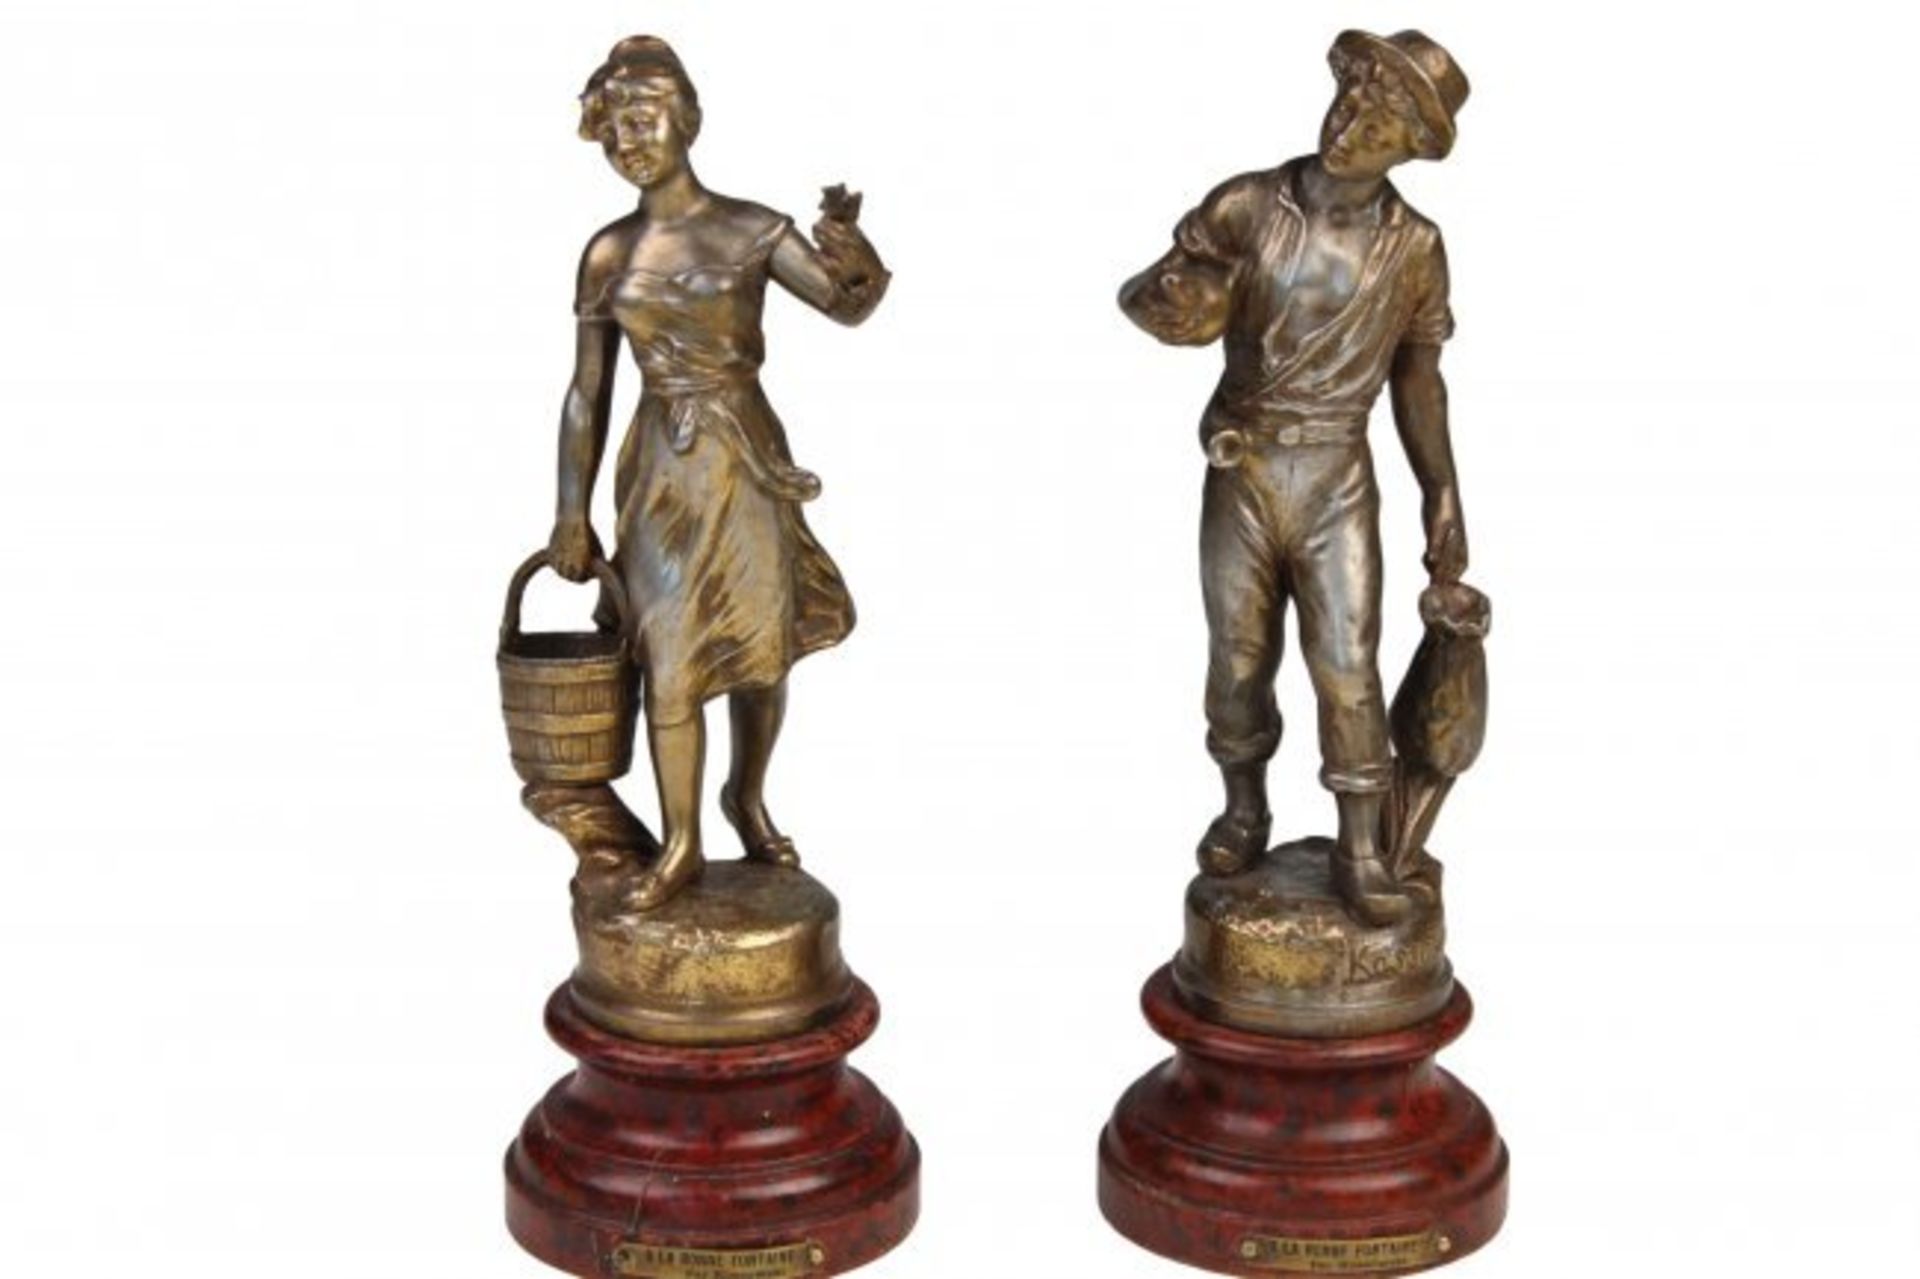 Antique Henryk Kossowski sculptures “By the fountain”